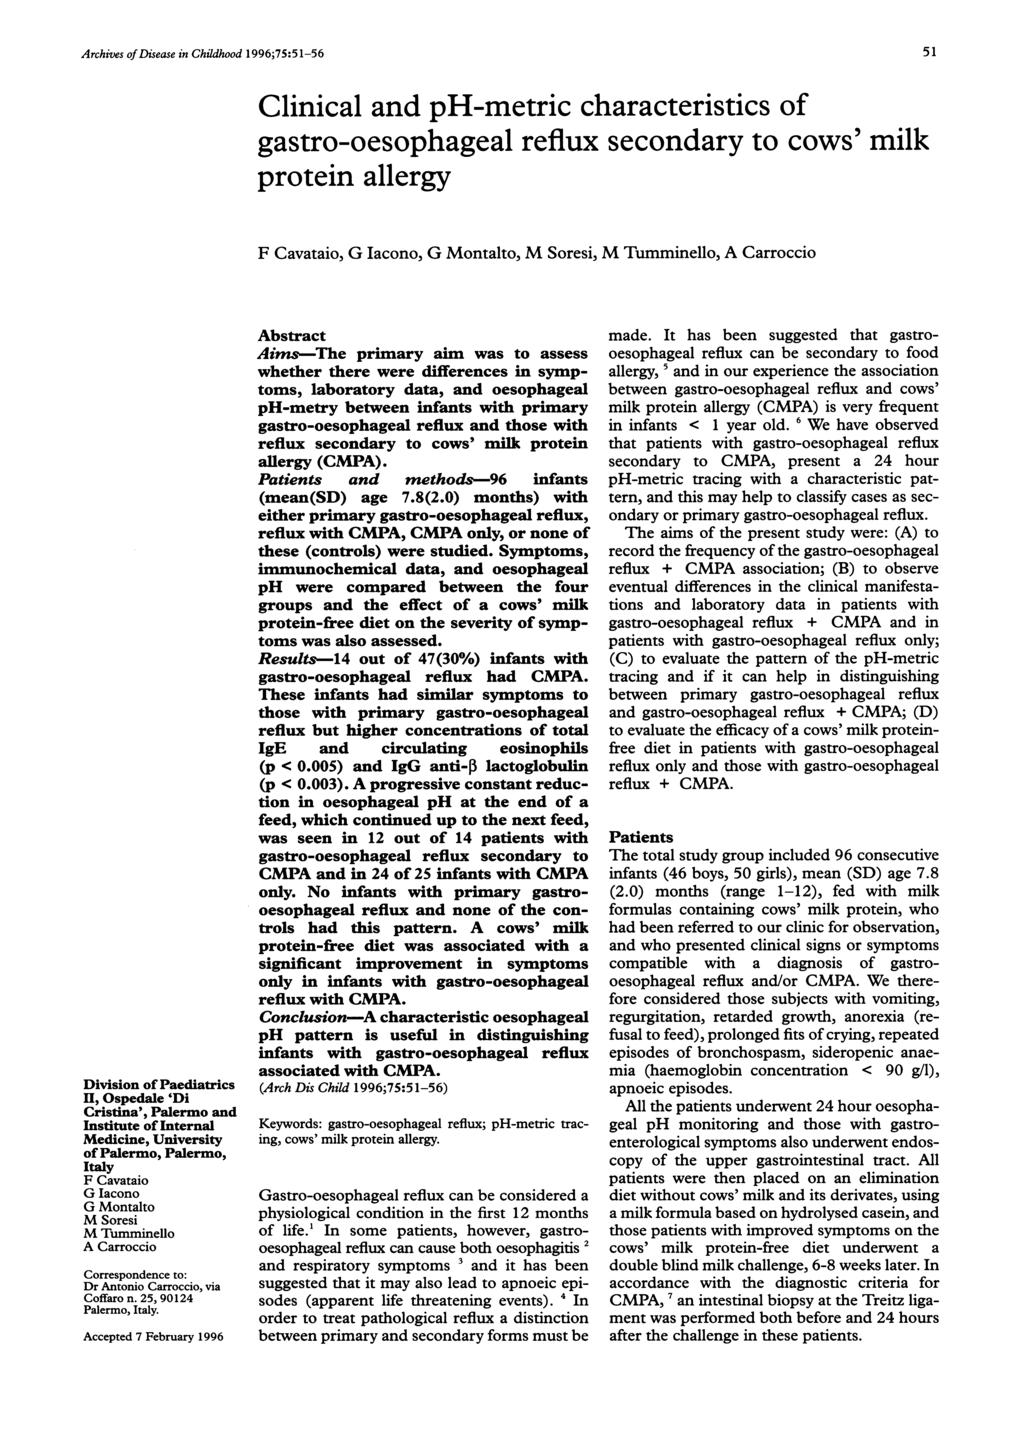 Archives ofdisease in Childhood 1996;75:51-56 51 Division of Paediatrics II, Ospedale 'Di Cristina', Palermo and Institute of Internal Medicine, University of Palermo, Palermo, Italy F Cavataio G